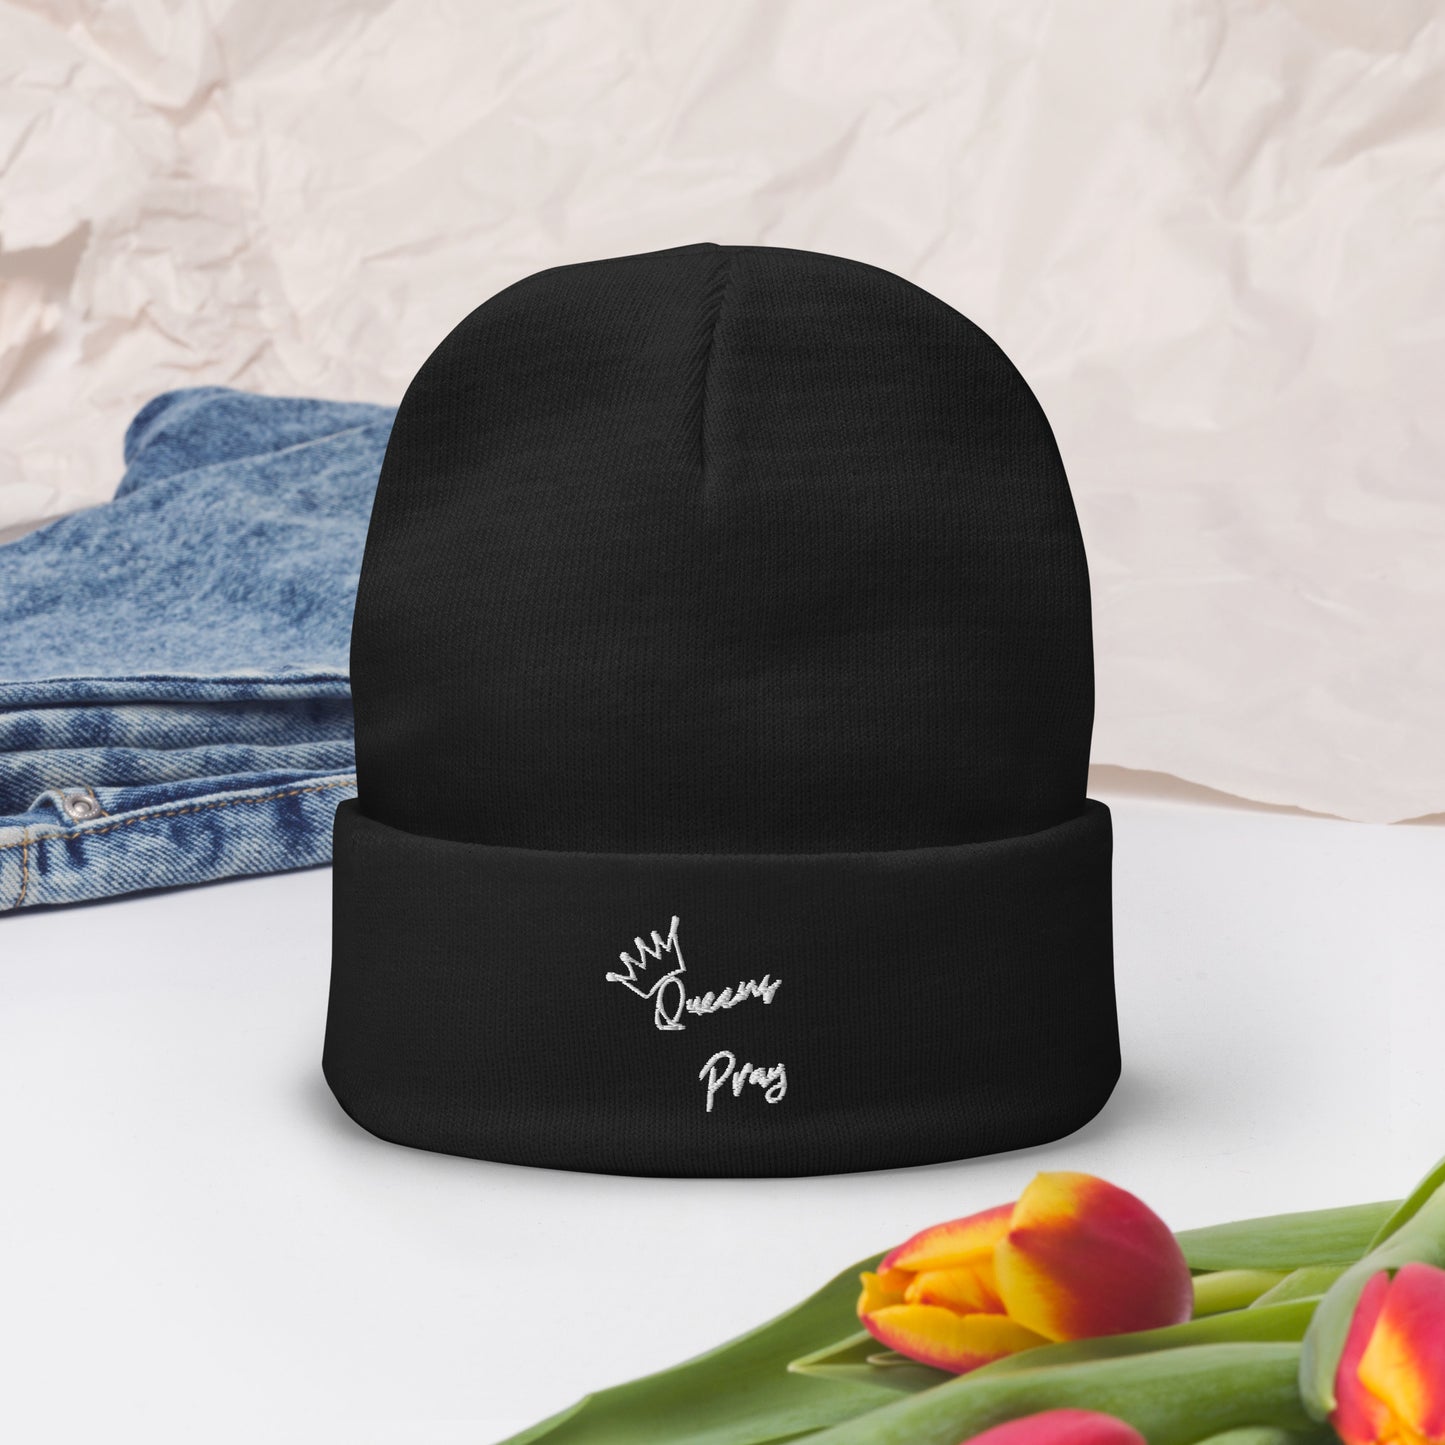 Queen's Pray Embroidered Beanie